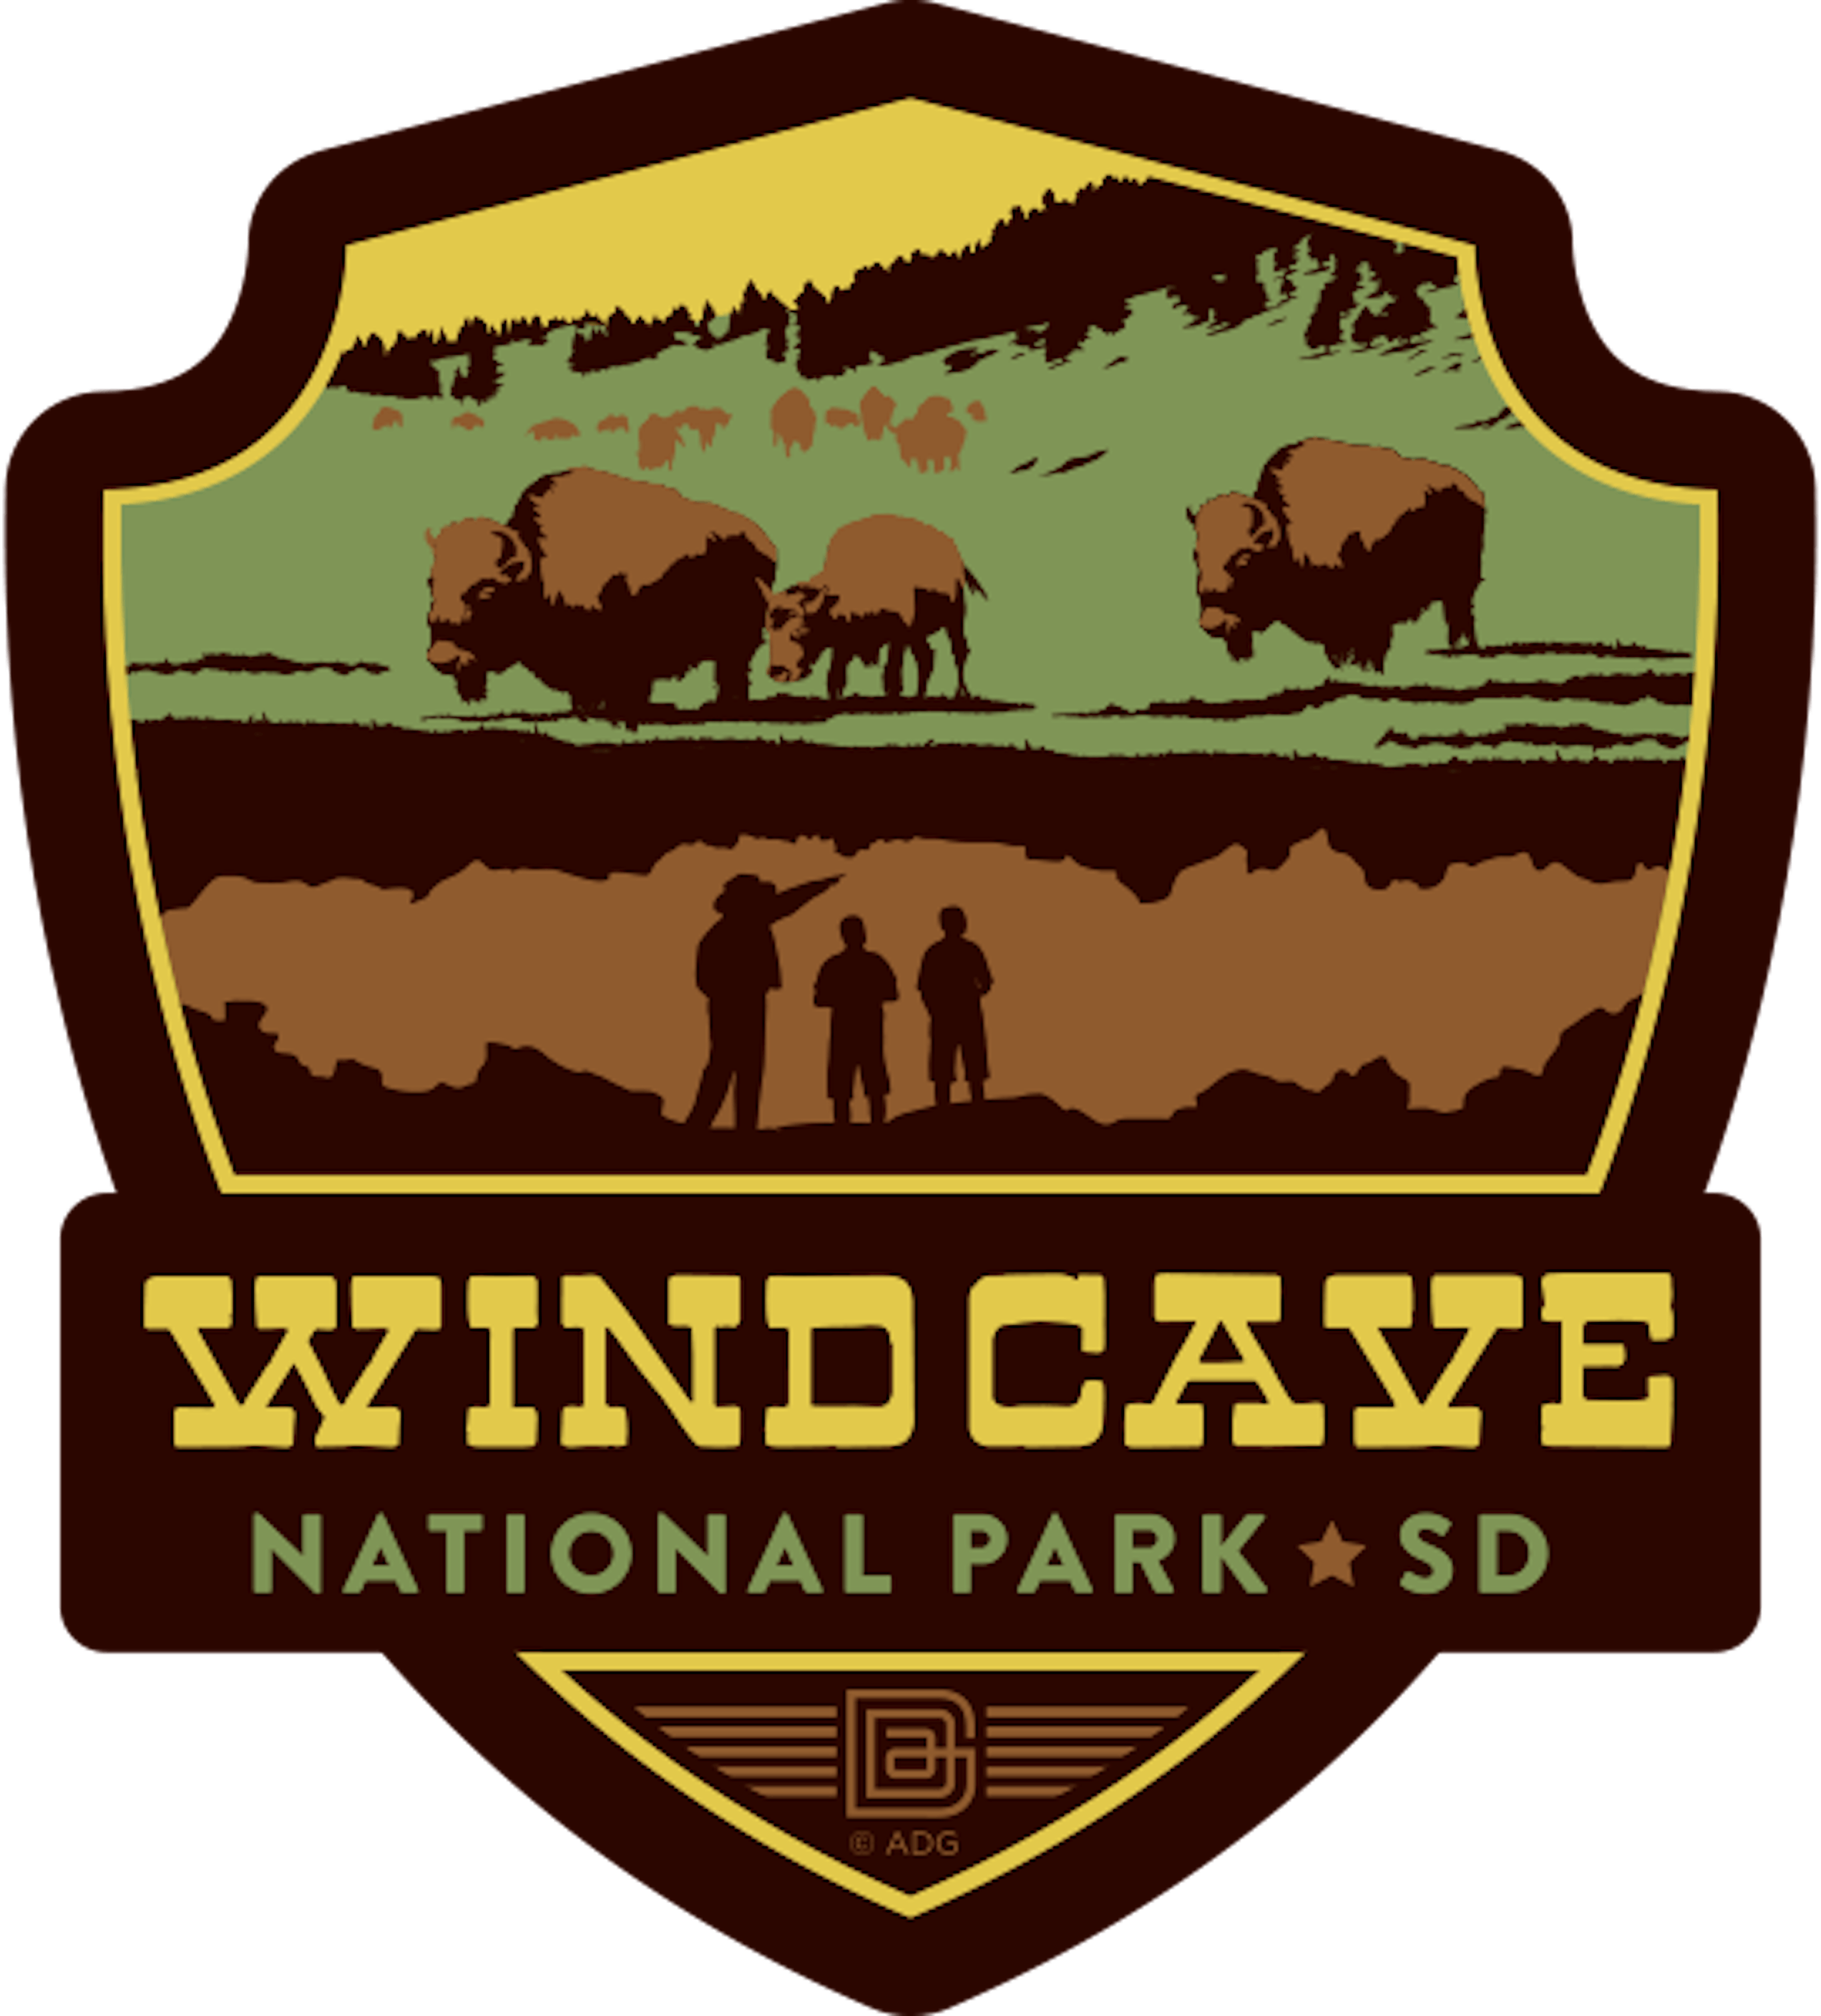 Wind Cave NP